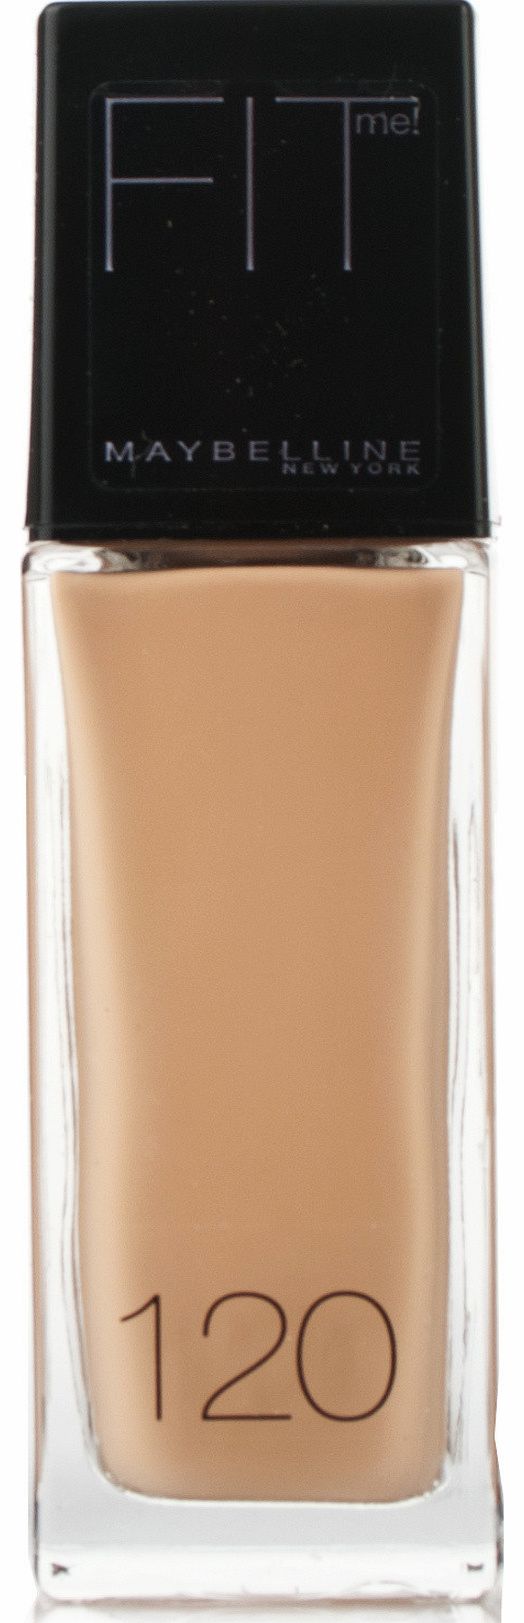 Maybelline Fit Me Foundation Classic Ivory